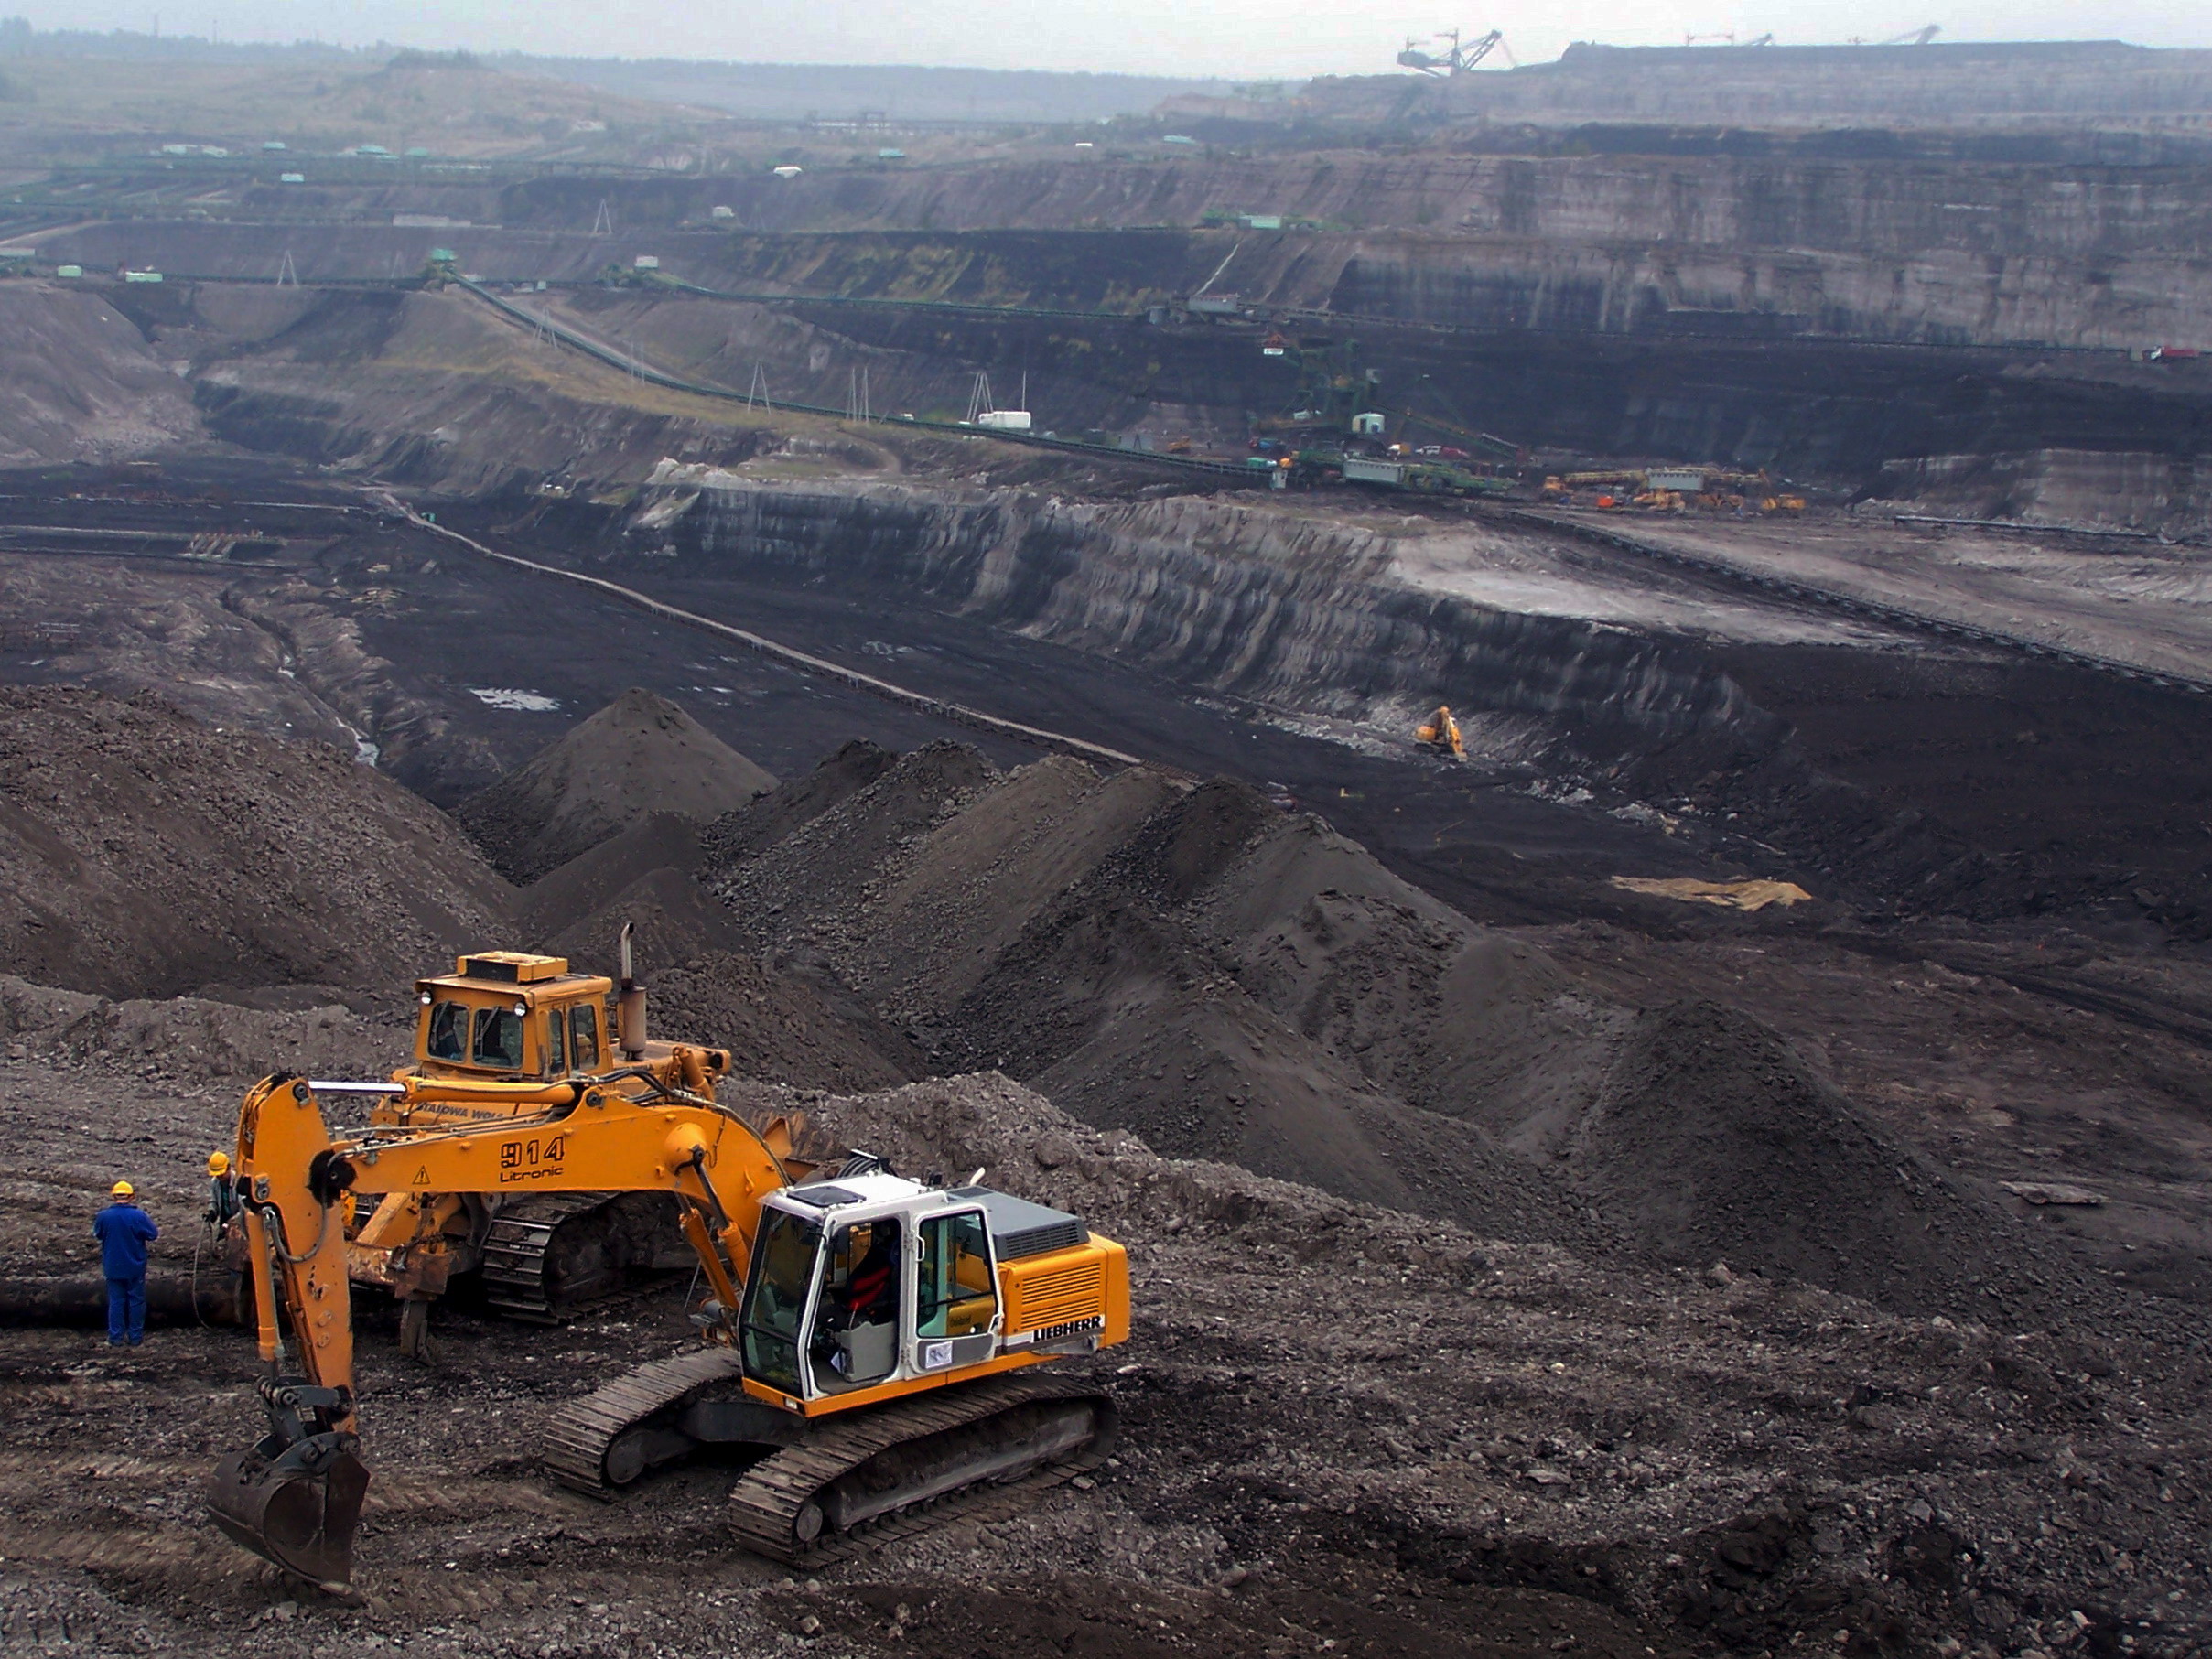 Indian private firms seen developing 15 million tonnes capacity coal mines this year